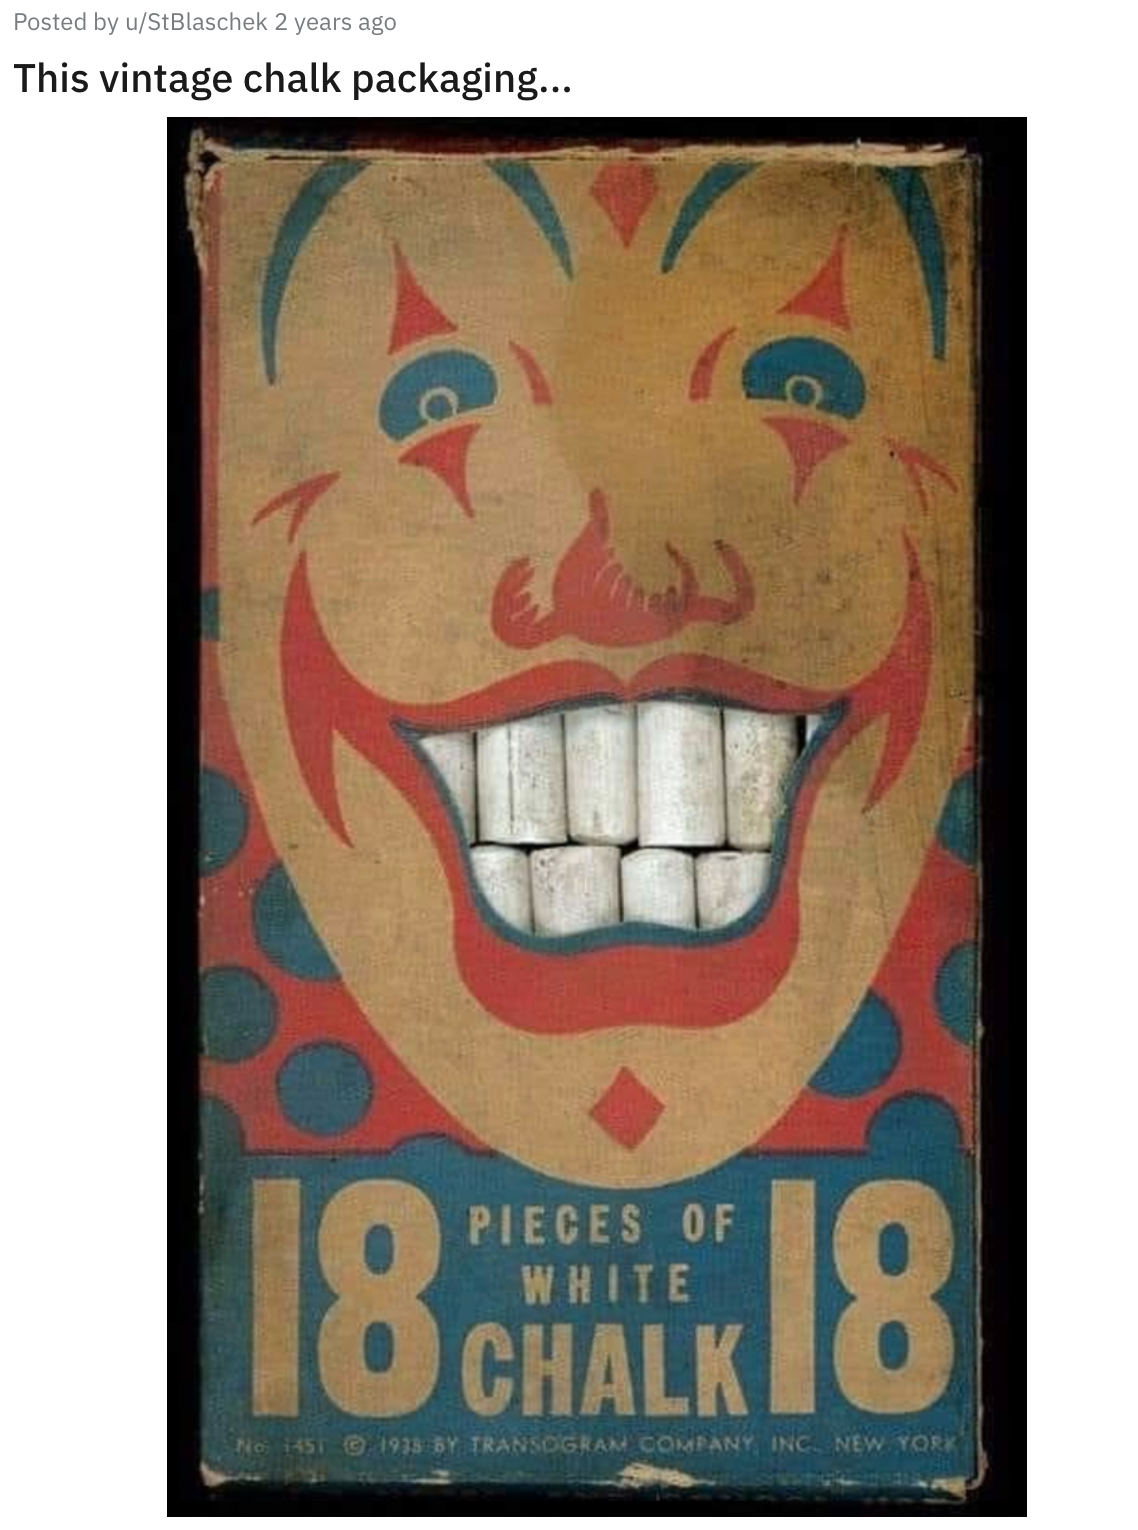 horrible designs - Chalk - Posted by uStBlaschek 2 years ago This vintage chalk packaging... 18 18 A6 122.1916 Y Transgran Cofany, Inc. New York Pieces Of White Chalk